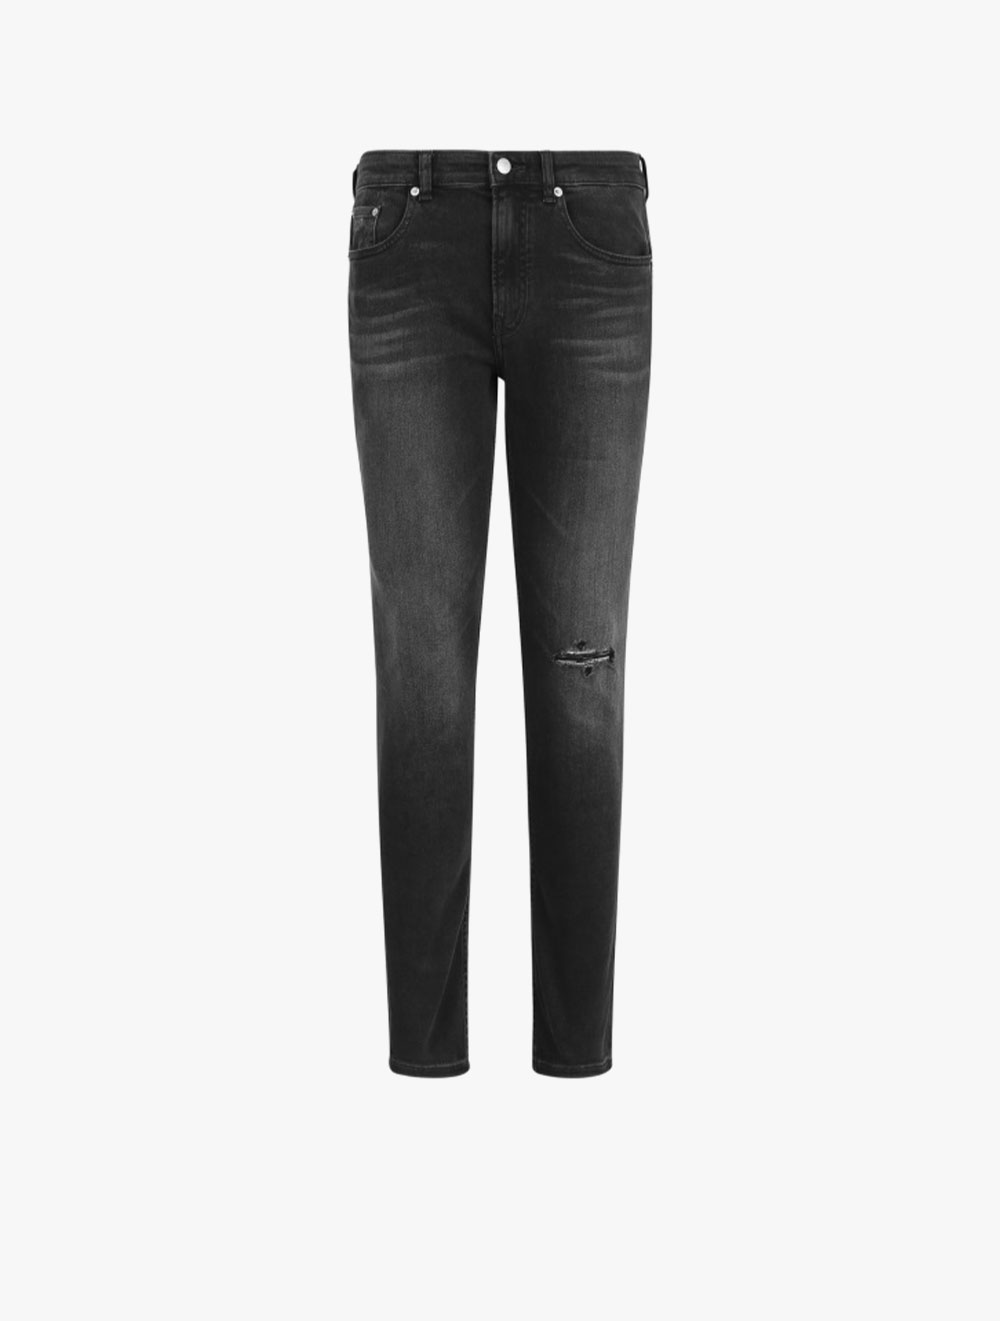 CK Jeans - retro low-rise ripped skinny jeans